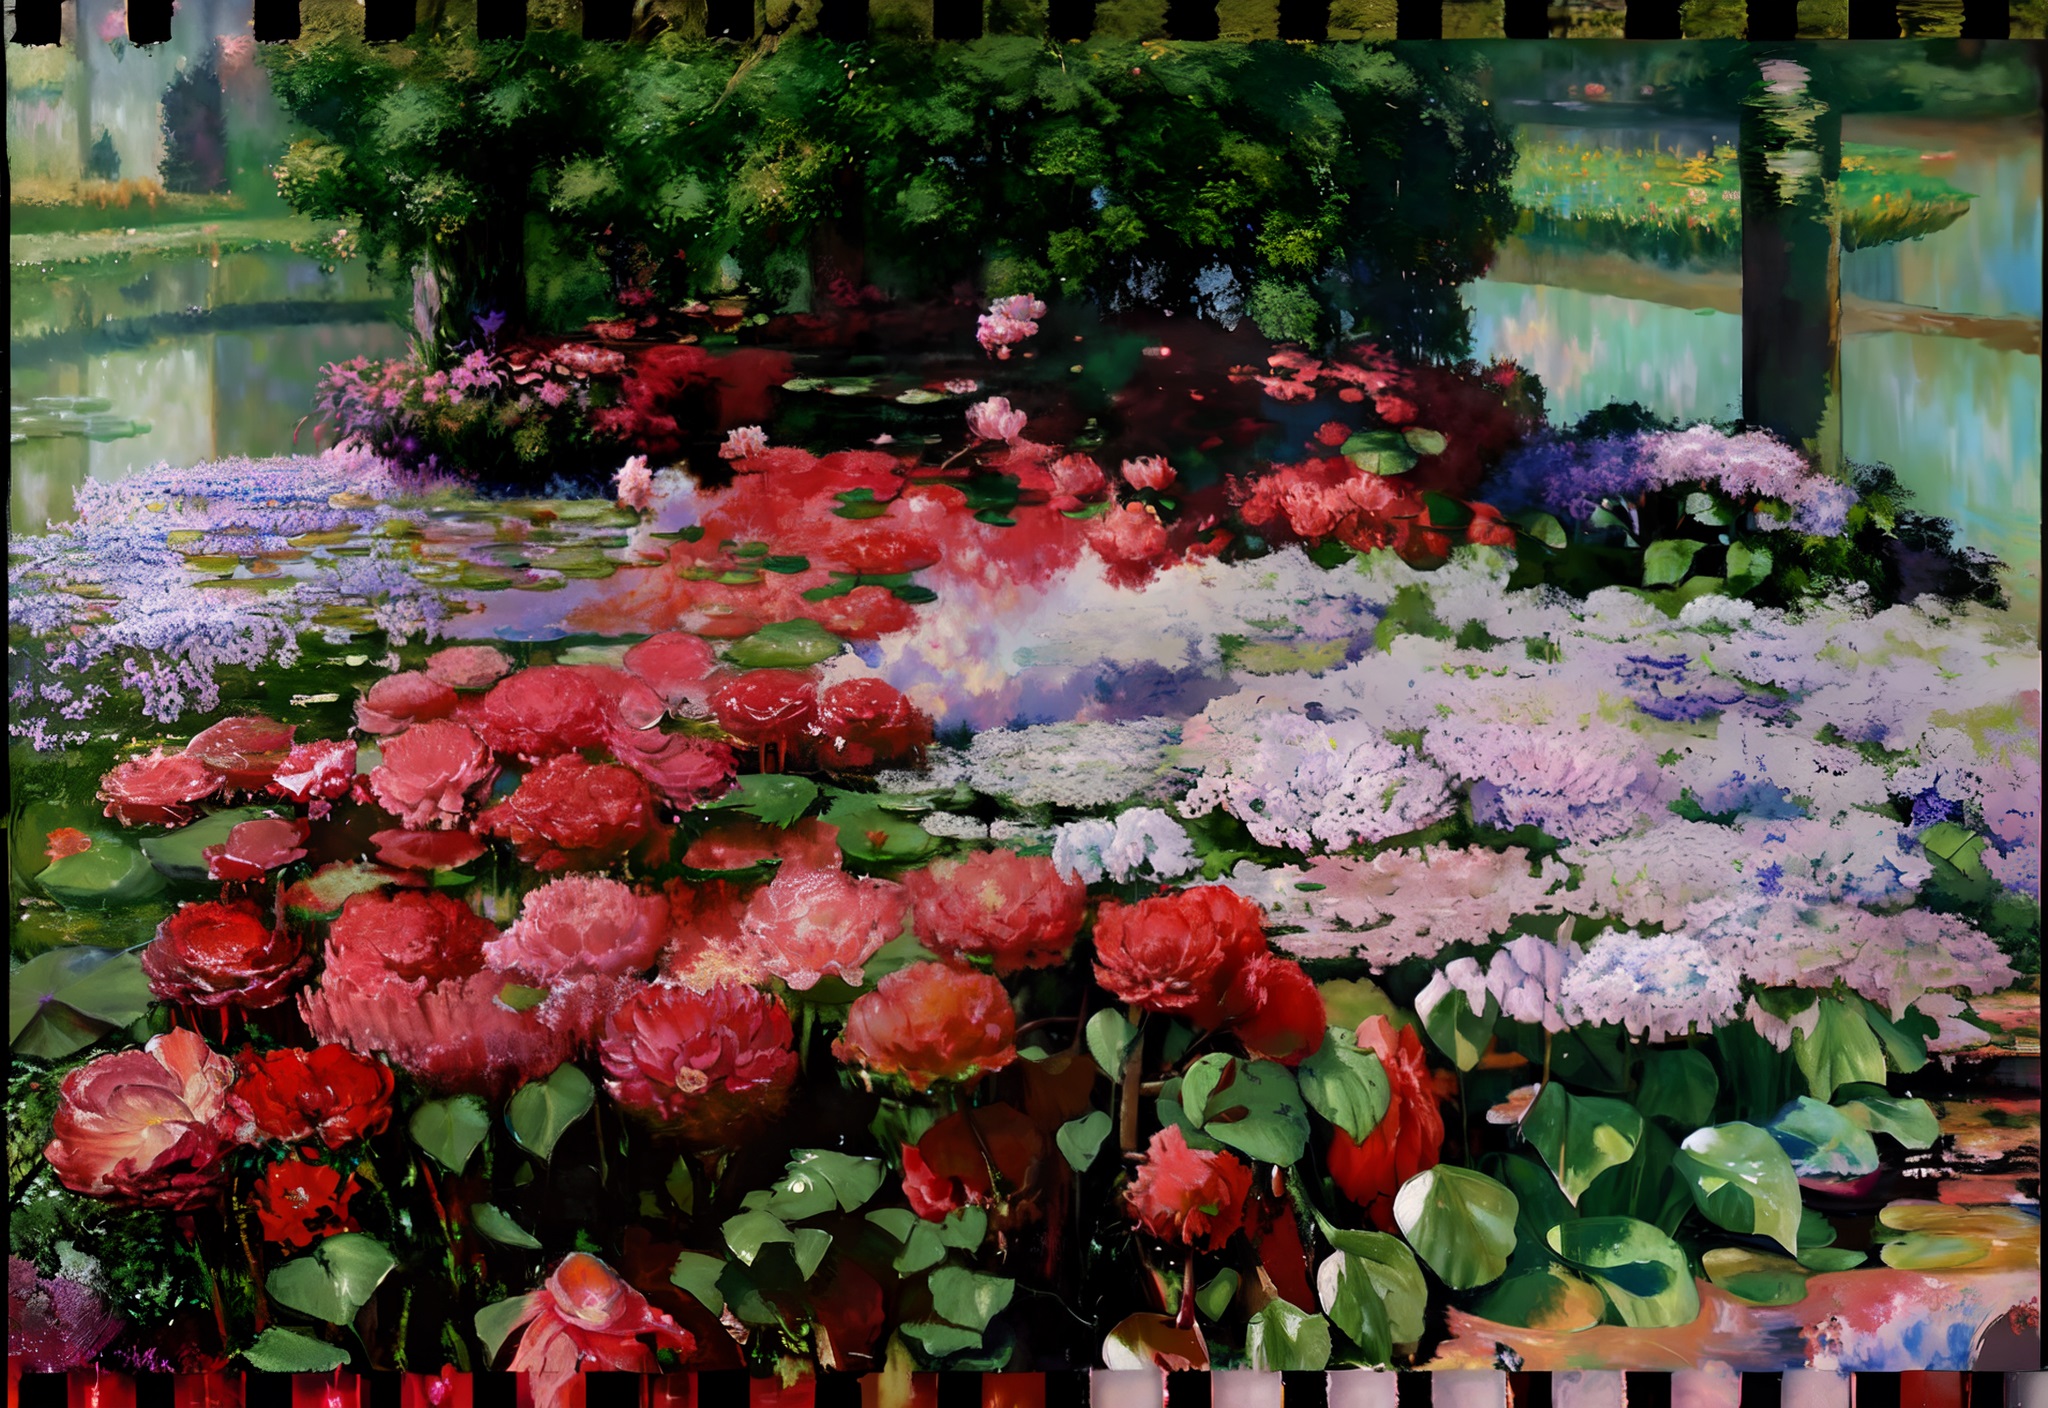 Impressionistic painting convered from IMAX film shot on medium format camera